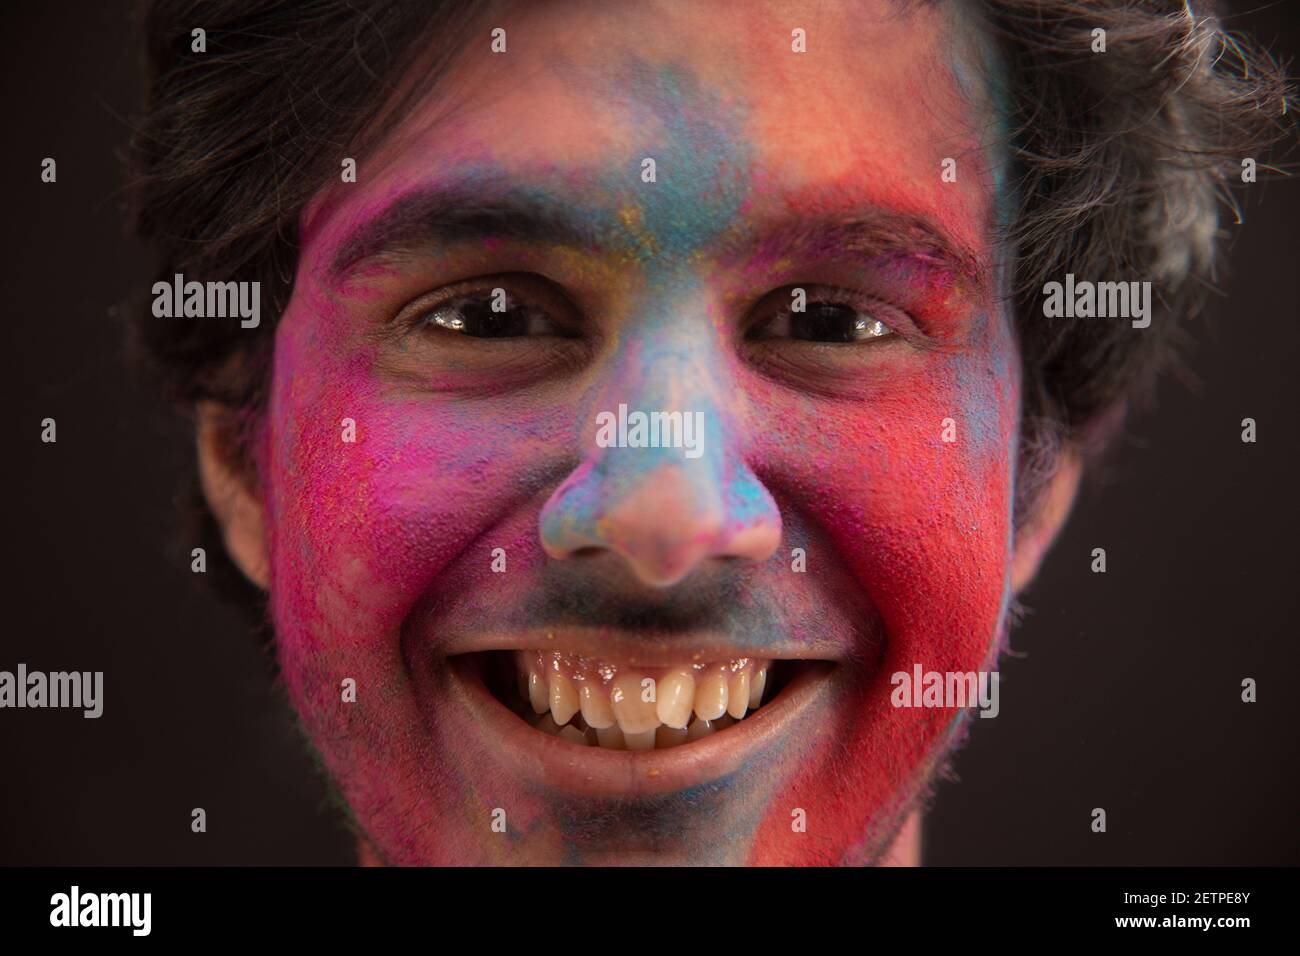 PORTRAIT OF A HAPPY YOUNG MAN WITH GULAL ON HIS FACE LOOKING AT CAMER AND SMILING Stock Photo